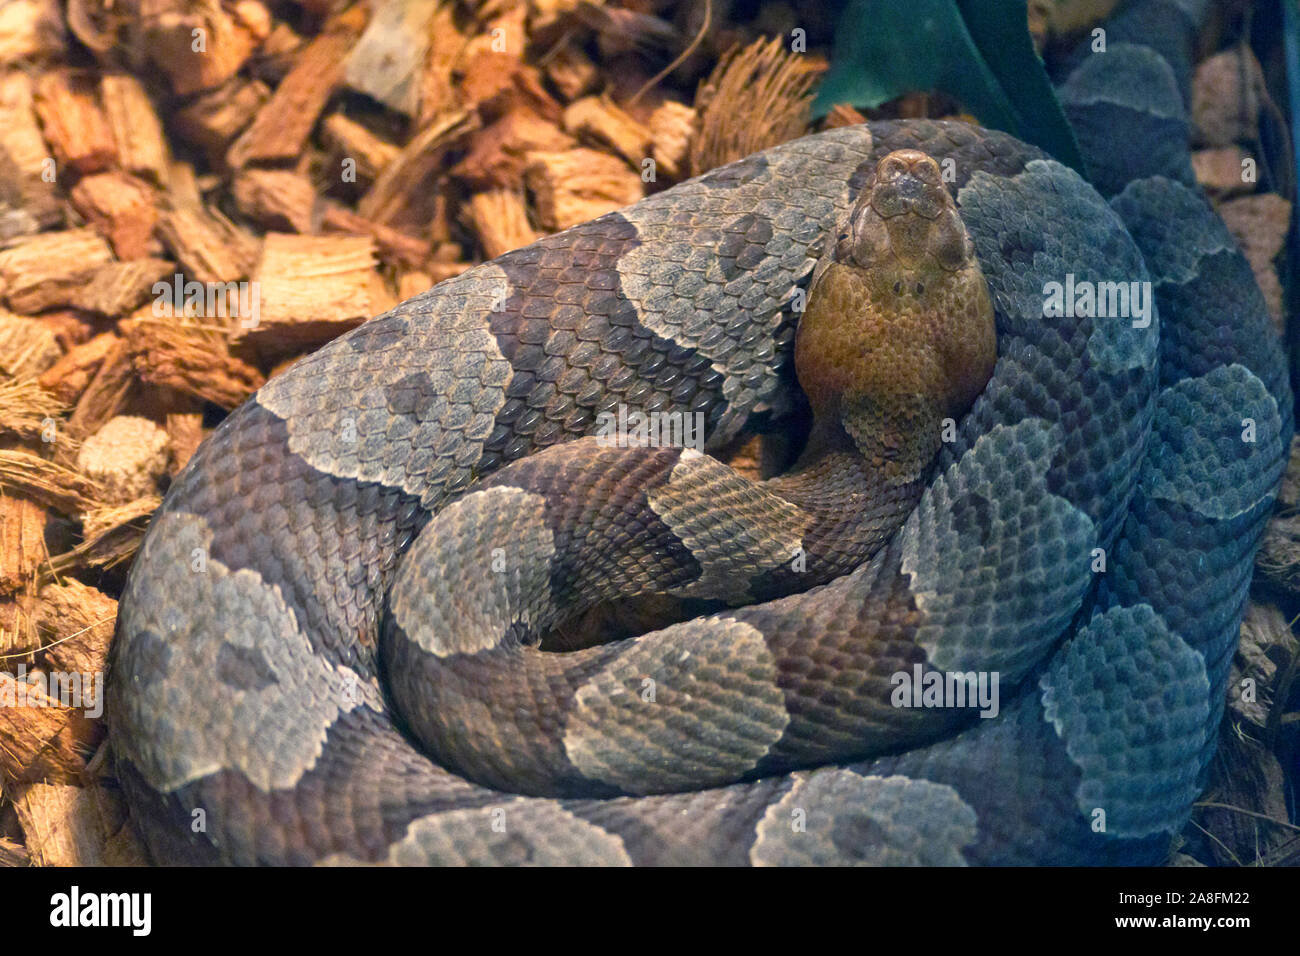 A venemous Timber Rattlesnake lies colied as it rests among some wood chips Stock Photo